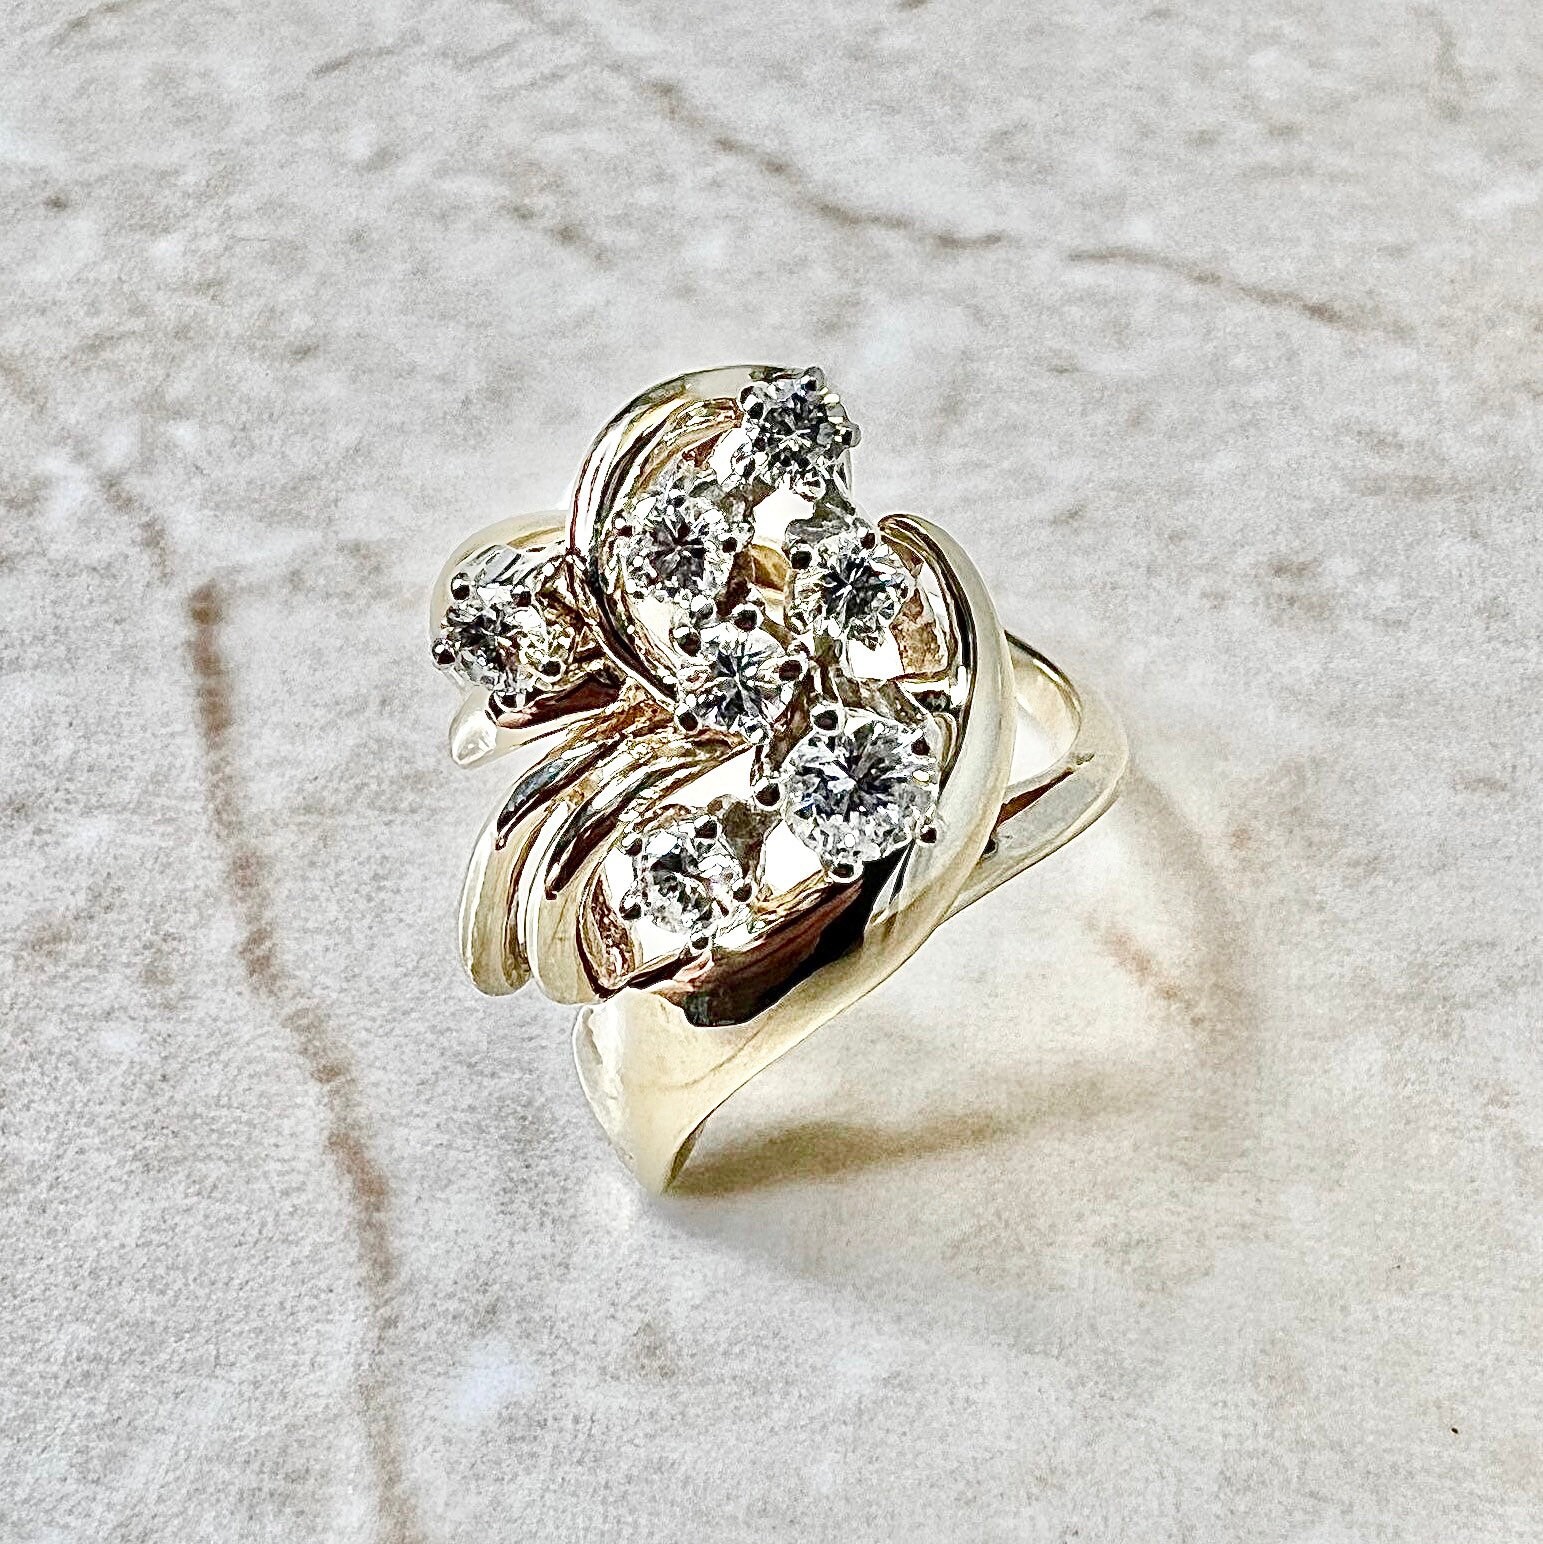 Vintage Diamond Cocktail Ring, Large Mid Century 18ct 18k White Gold  Cluster Dinner Ring. - Addy's Vintage